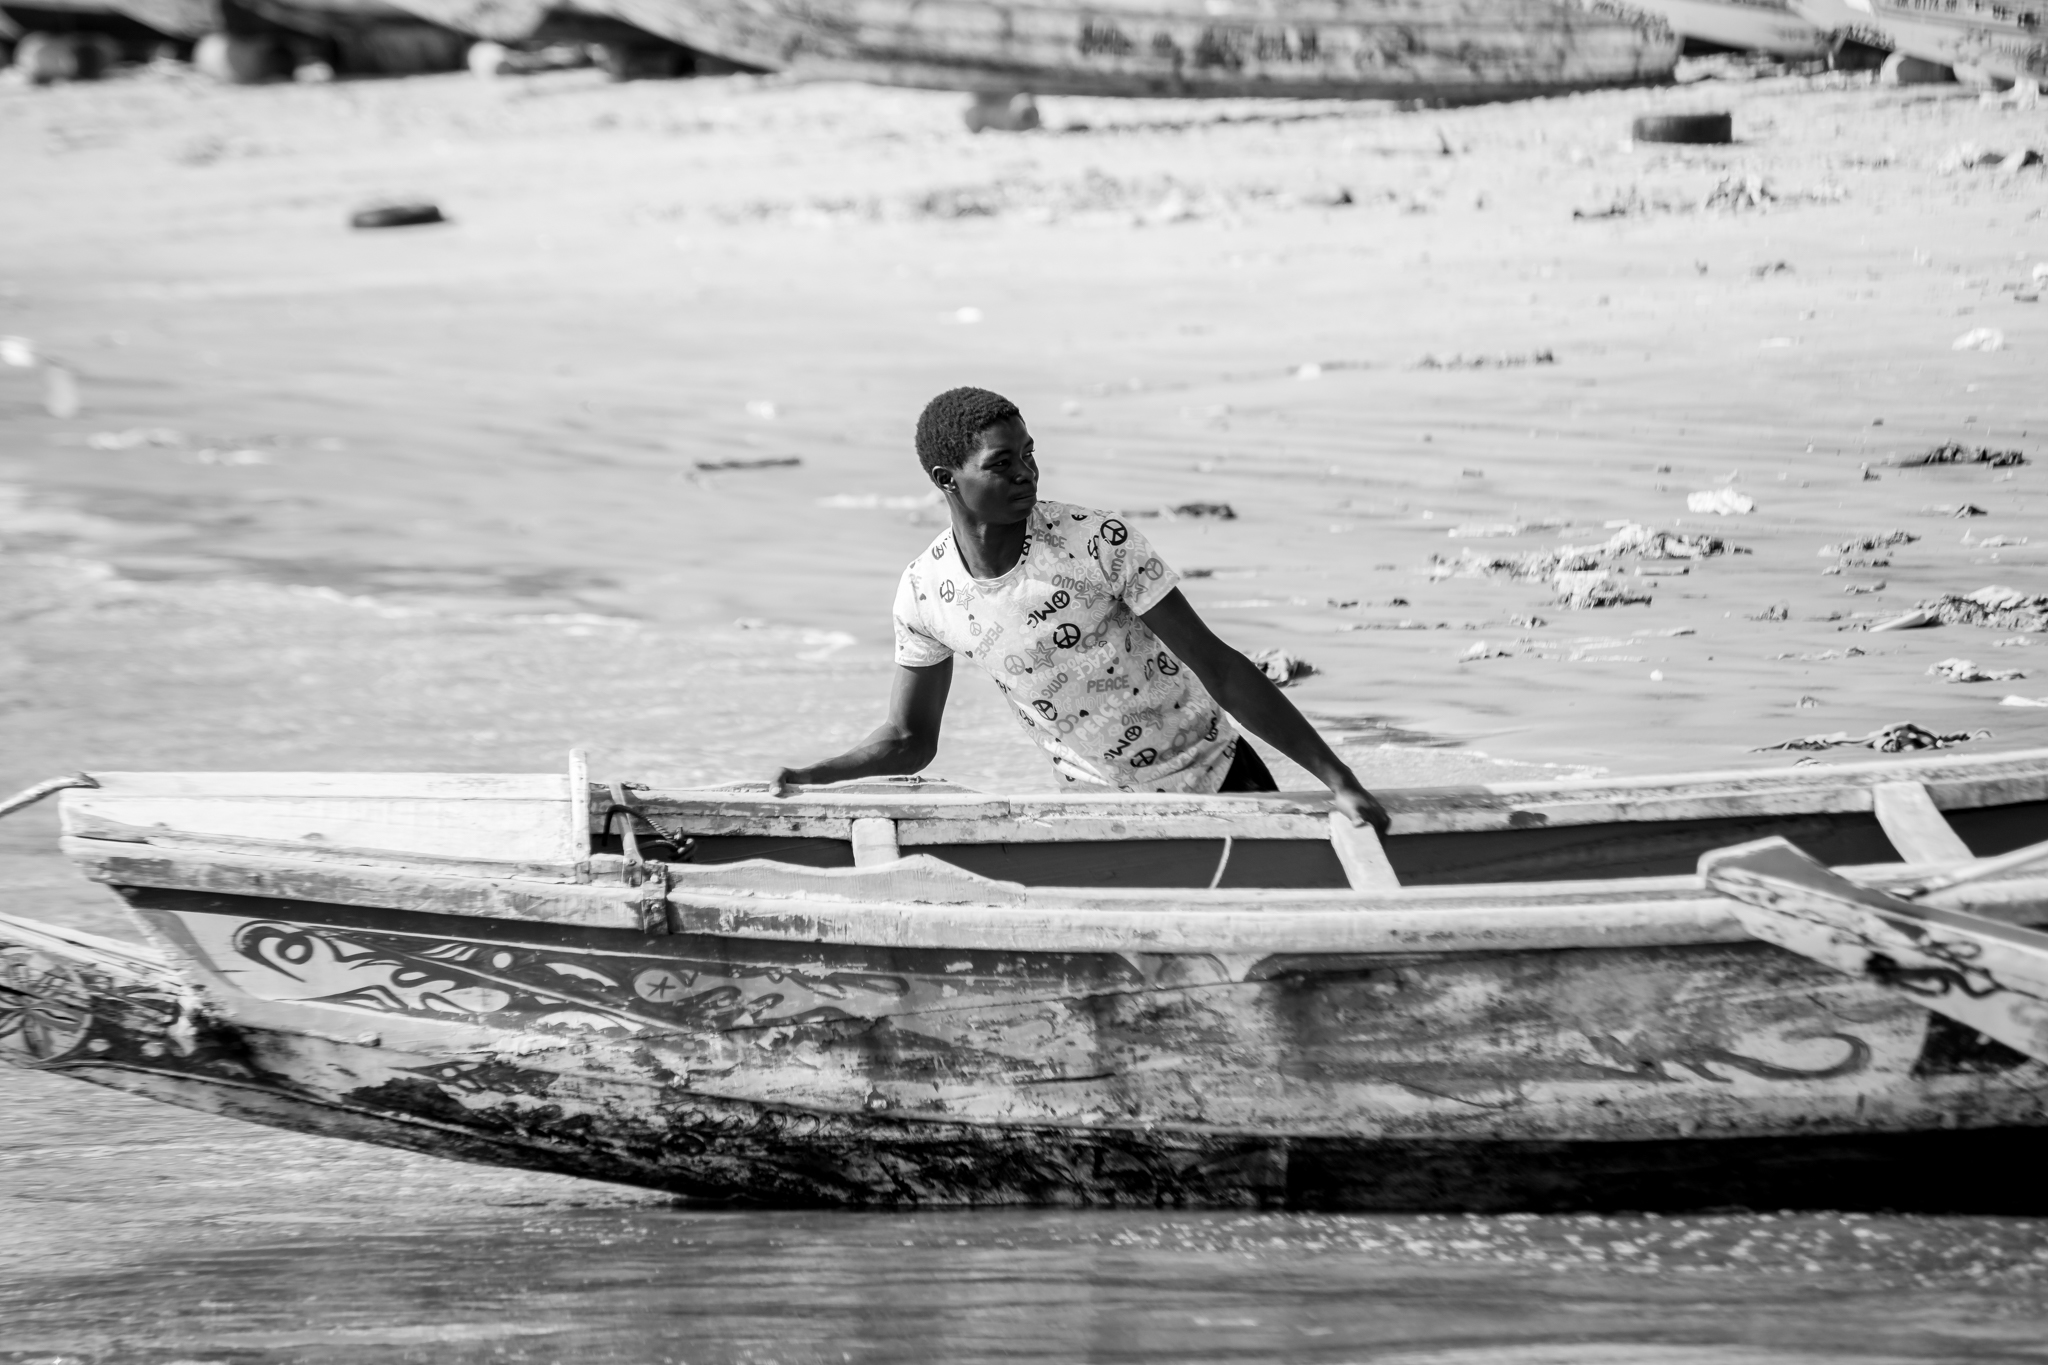 After the day of captures in front of the Senegalese beaches the fishermen gather with effort their boats or "canoes" to spend the night.